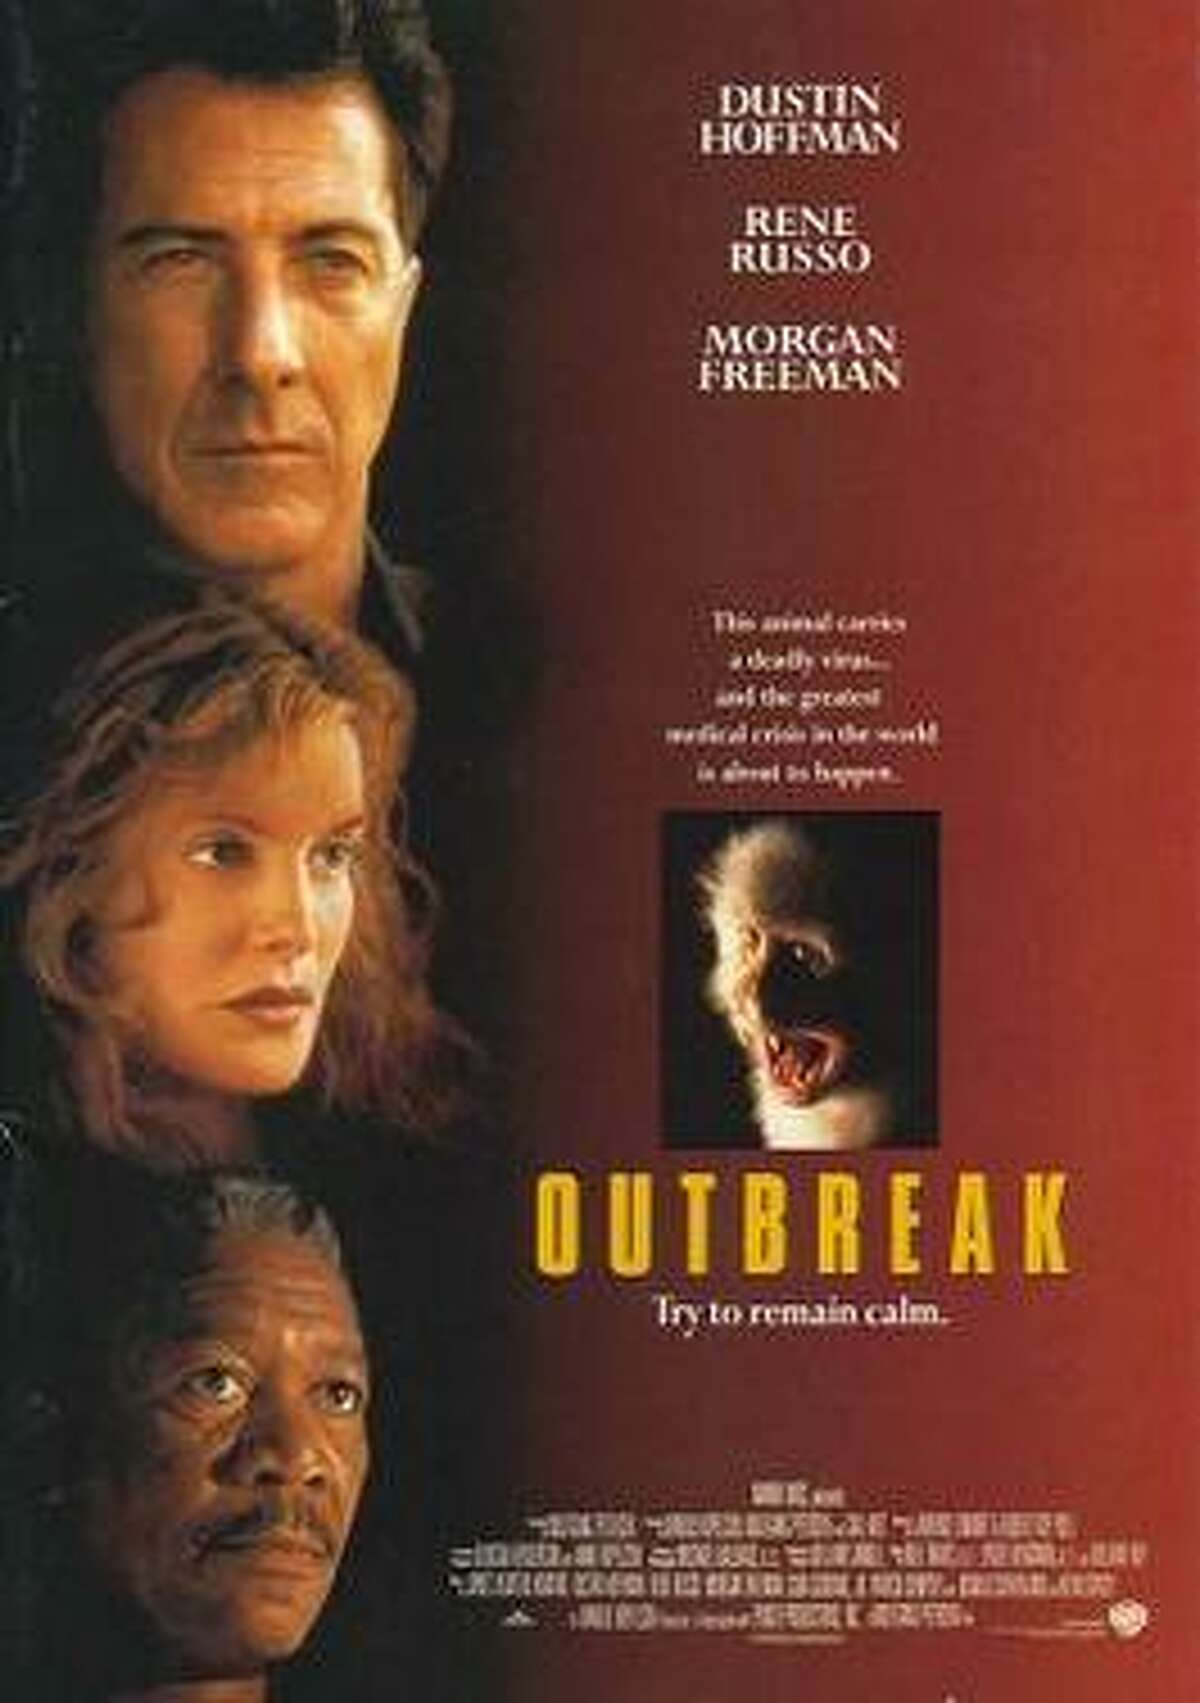 Outbreak (1995)Starring Dustin Hoffman, Rene Russo, Donald Sutherland and a young Cuba Gooding, Jr., “Outbreak” is about a break-out of an Ebola-like virus in a small California town and is the polar opposite of “Contagion” in every way. Instead of a slow-paced story with an ensemble cast, “Outbreak” moves like an action thriller and has a clear hero (Hoffman) who fights bureaucracy just as much as the virus itself (and, of course, the human villain who is revealed toward the end). It’s also delightfully '90s in its execution. Characters quip, scenes end with jokes that make no sense, and a young Patrick Dempsey plays a punk rock monkey-smuggler with a leather motorcycle jacket who's among the first to succumb to the virus. "Outbreak" is 59% on Rotten Tomatoes and available to rent on Amazon for $3.99.